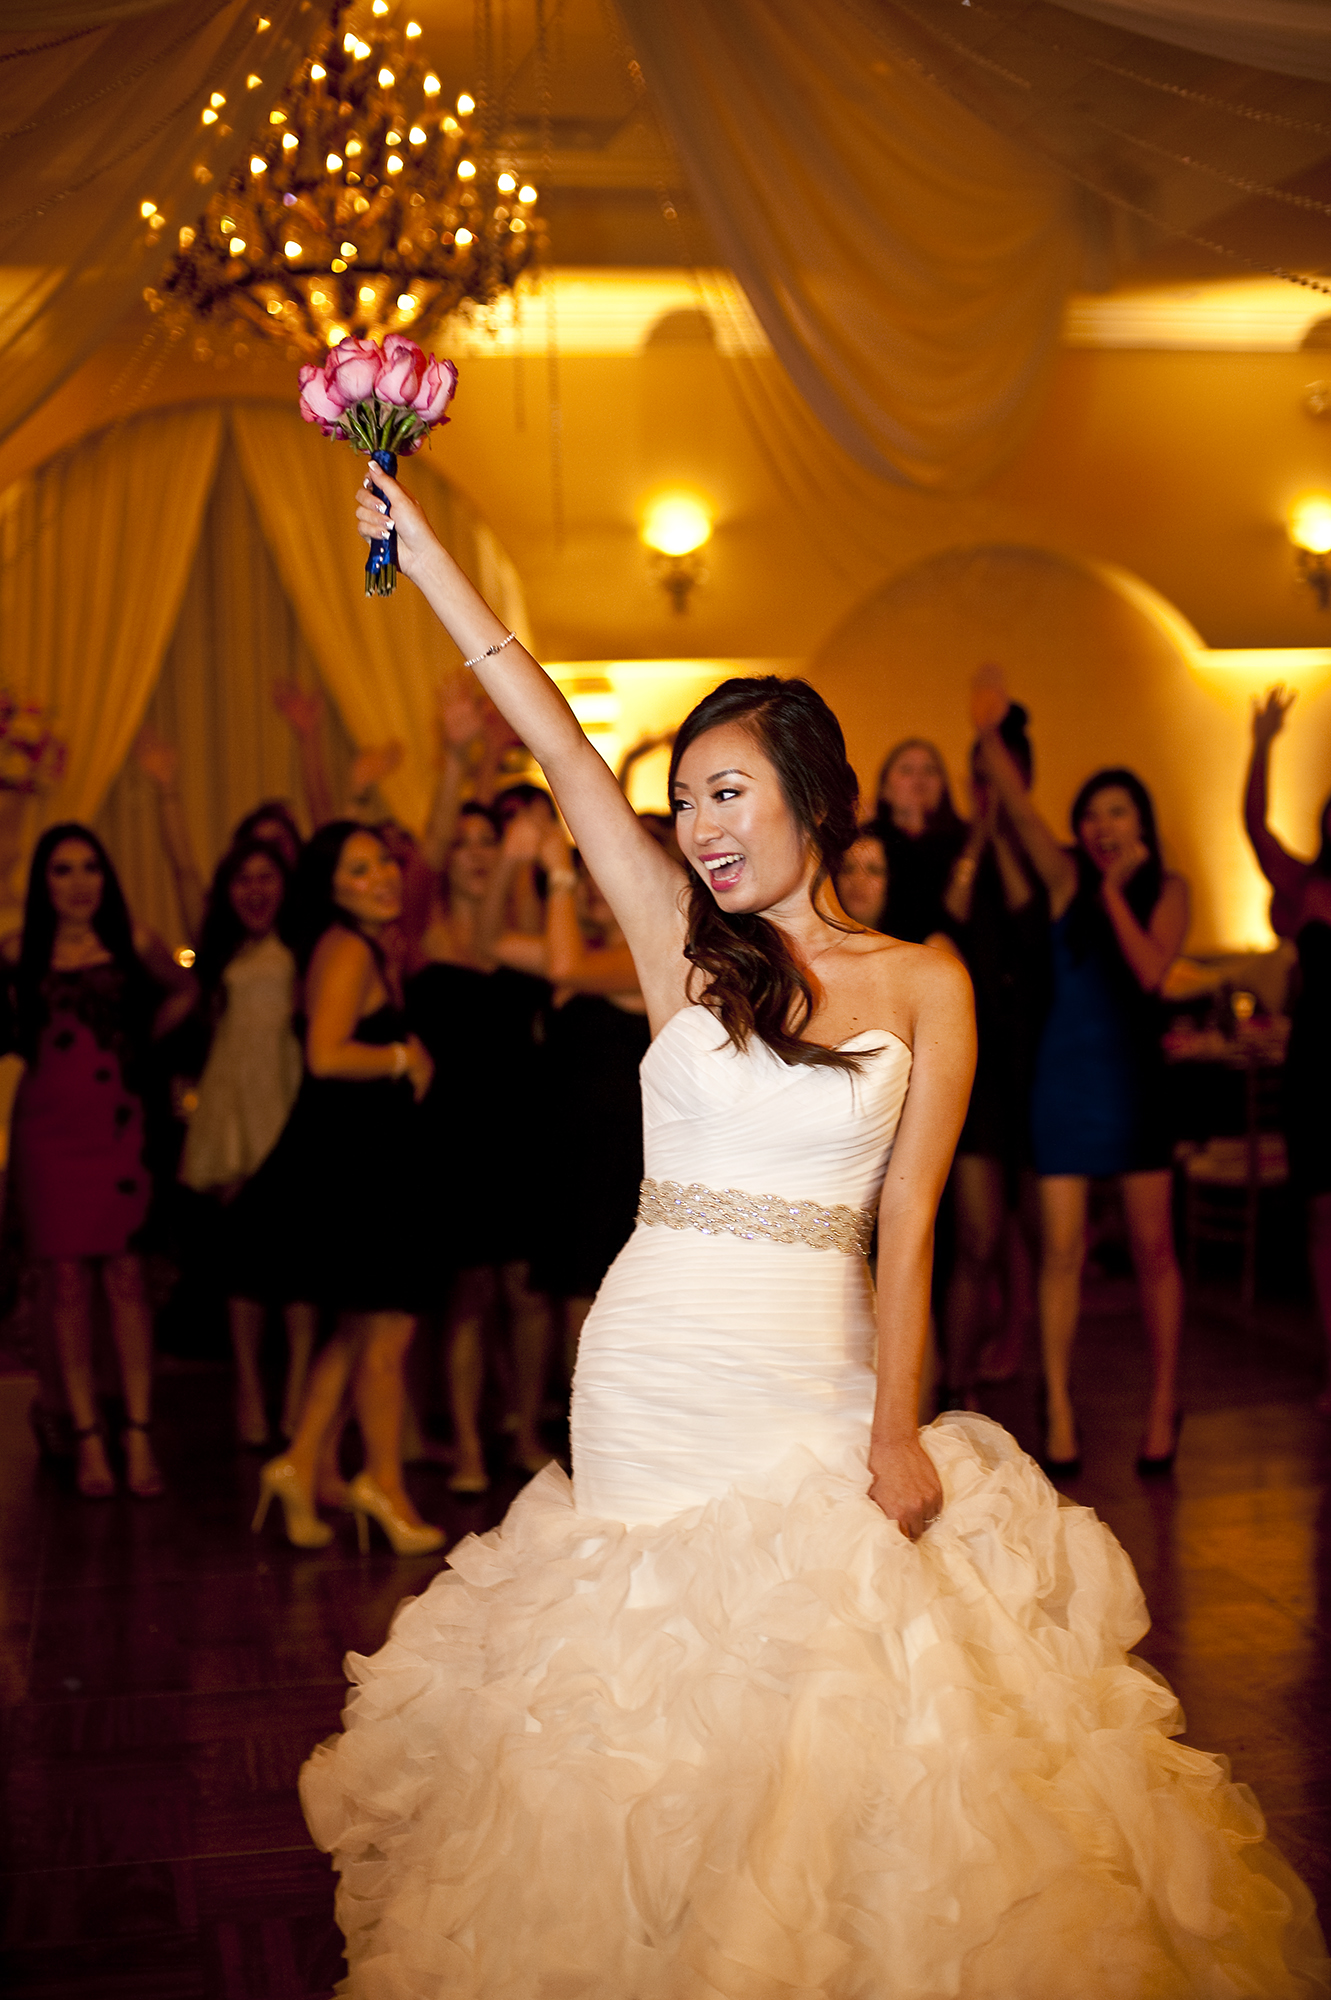 The bride, Jessica Alvidrez, rallies all her single ladies to the dance floor for her bouquet toss at The Villa in Westminister, Calif., on Saturday, November 16, 2013.  The women cheered and raised their arms in the air as the bride to be leaped and caught it on the ground.